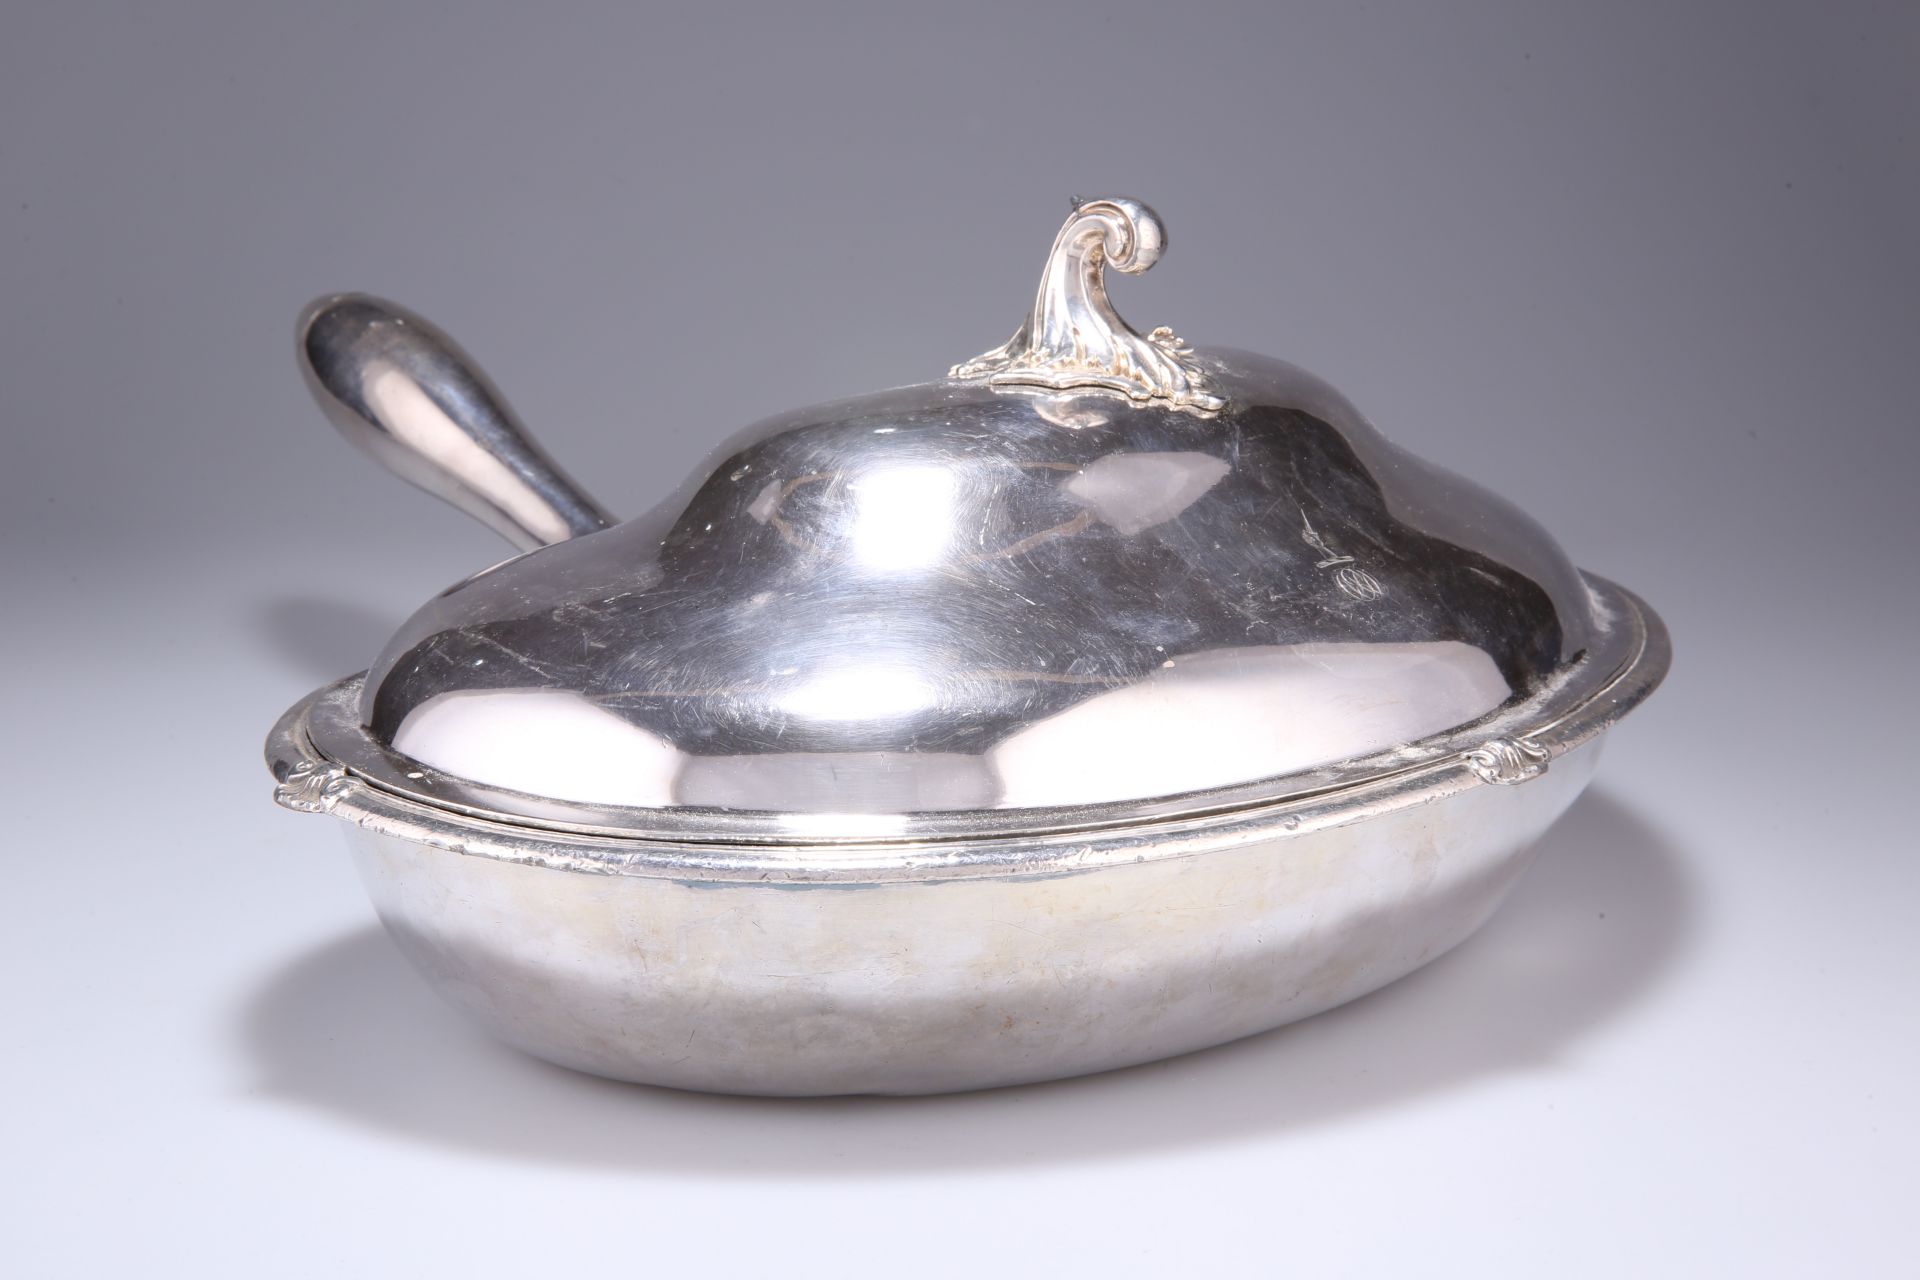 AN OLD SHEFFIELD PLATE SERVING DISH, CIRCA 1830